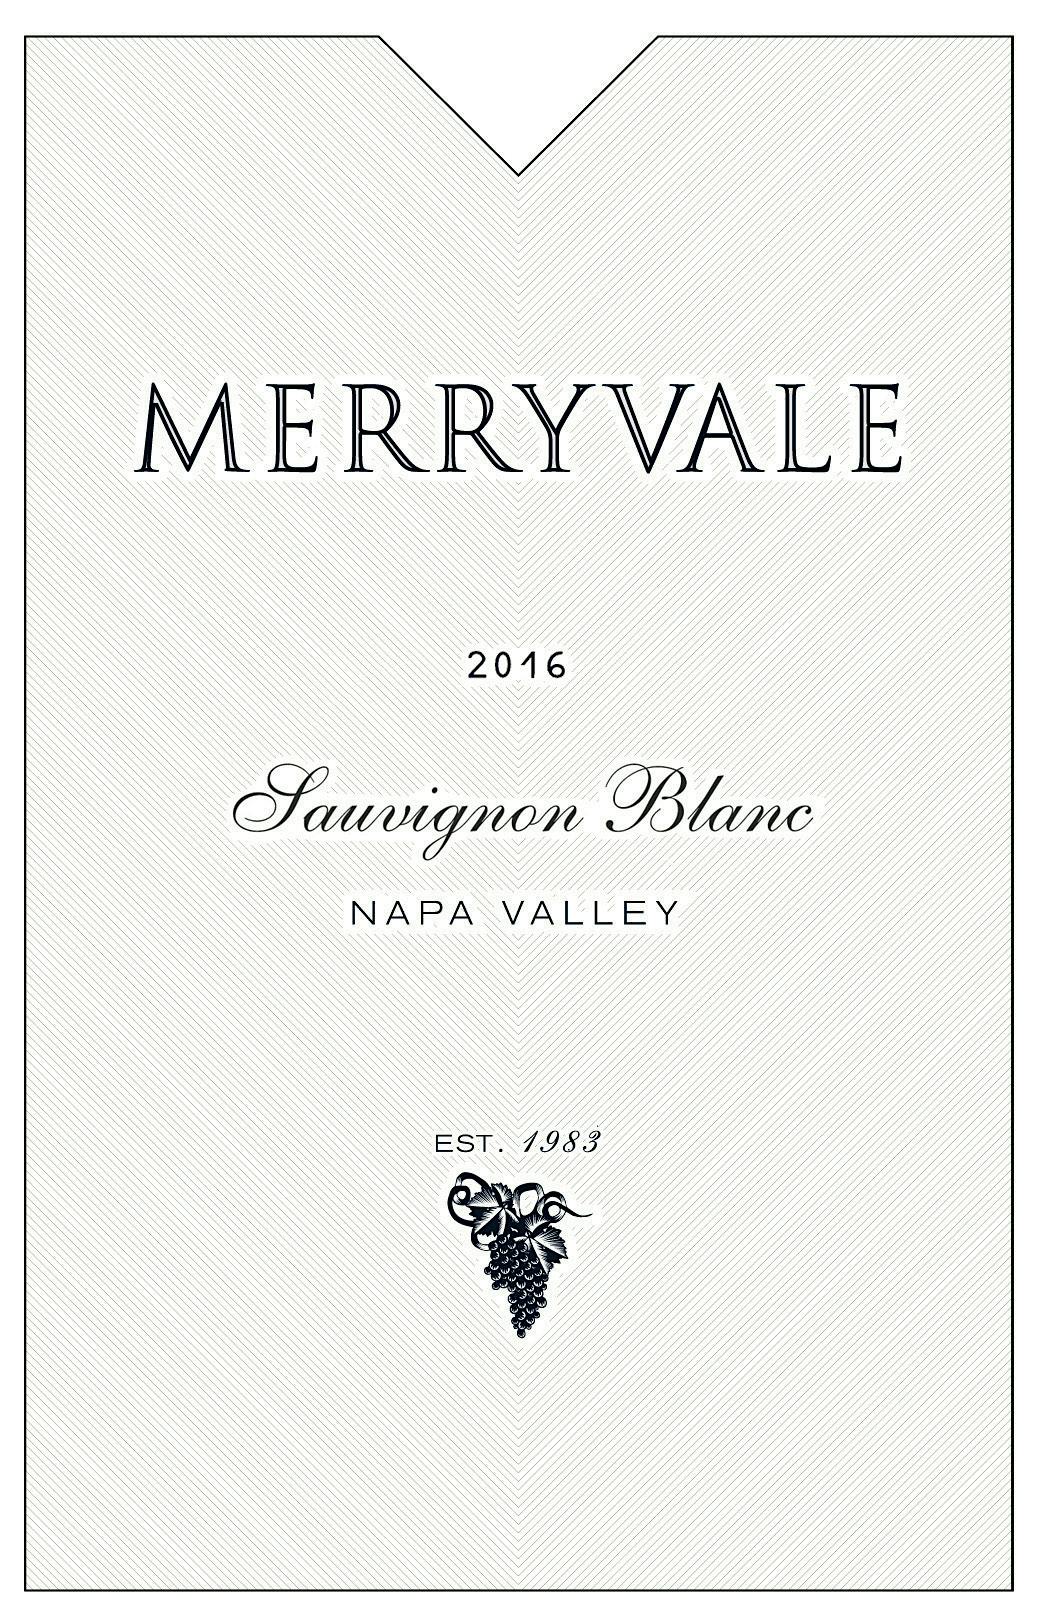 Label for Merryvale